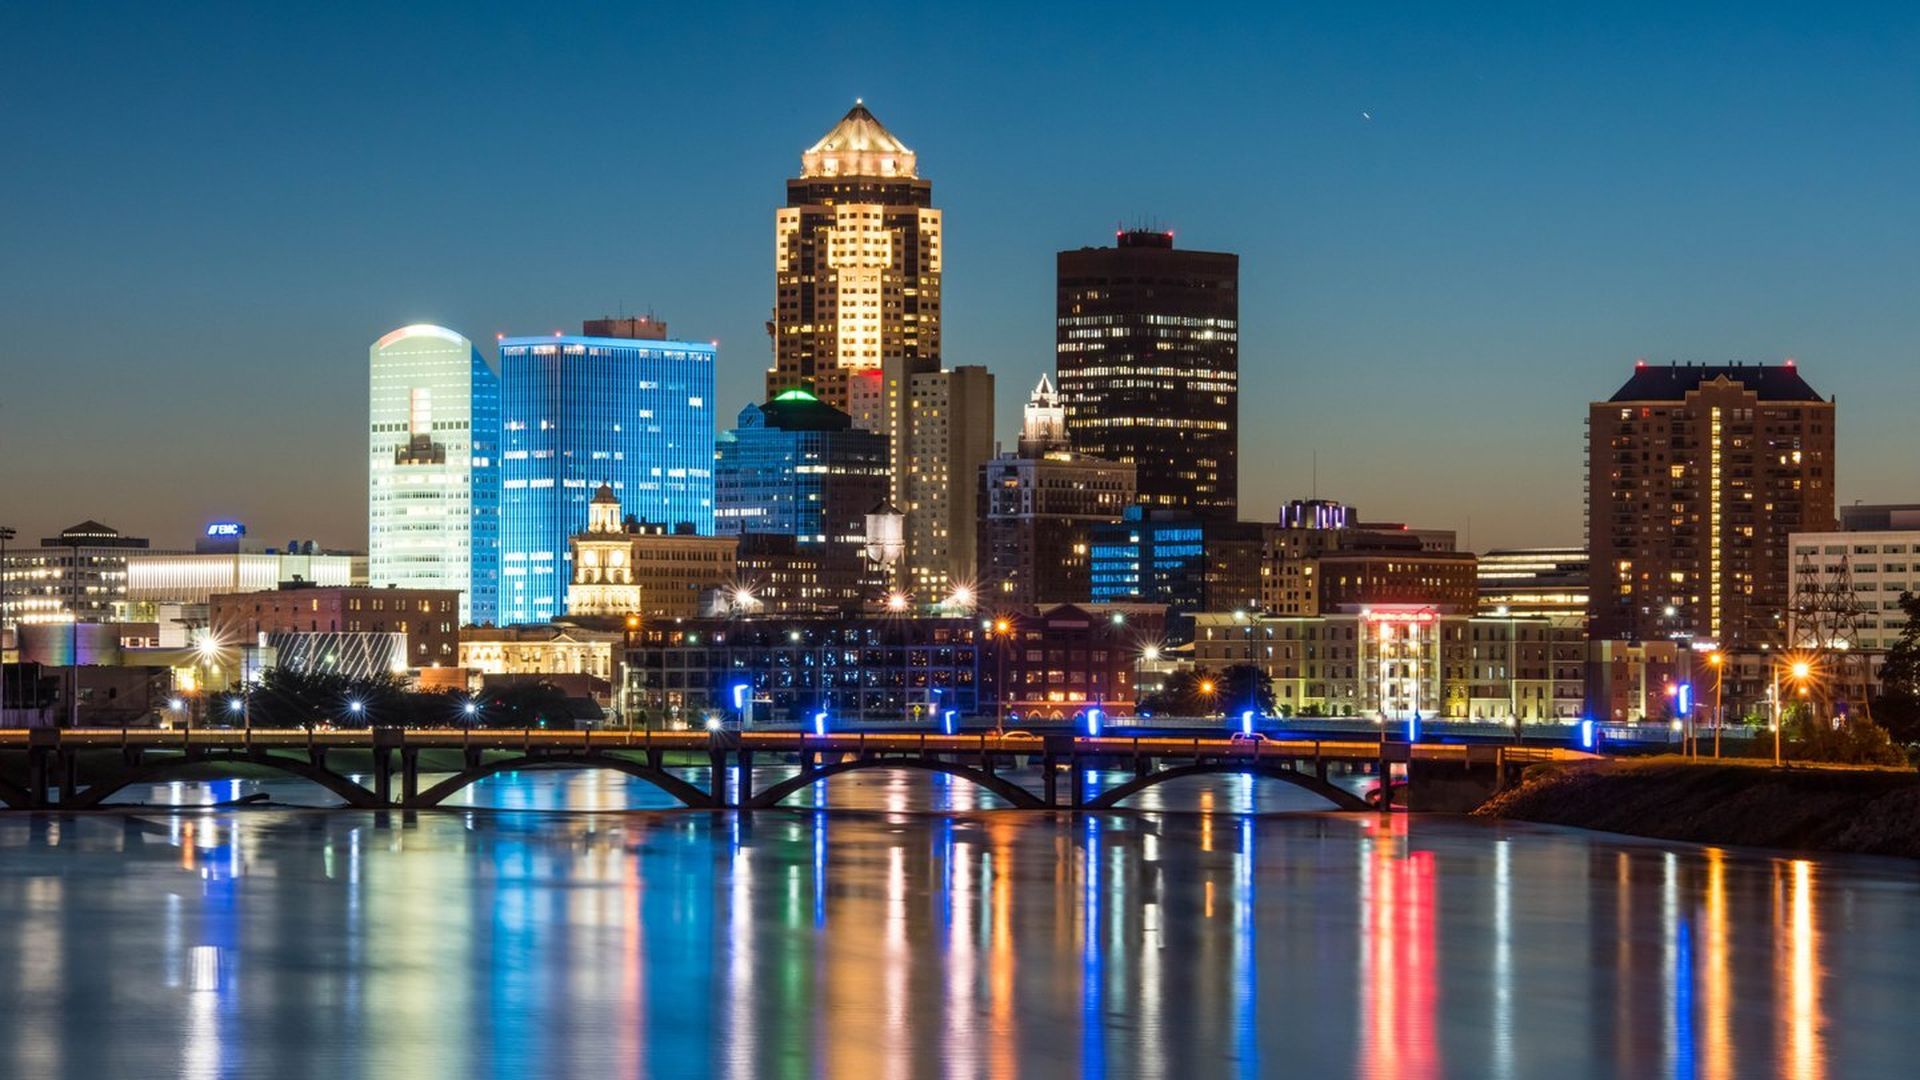 An image of Des Moines' skyline.